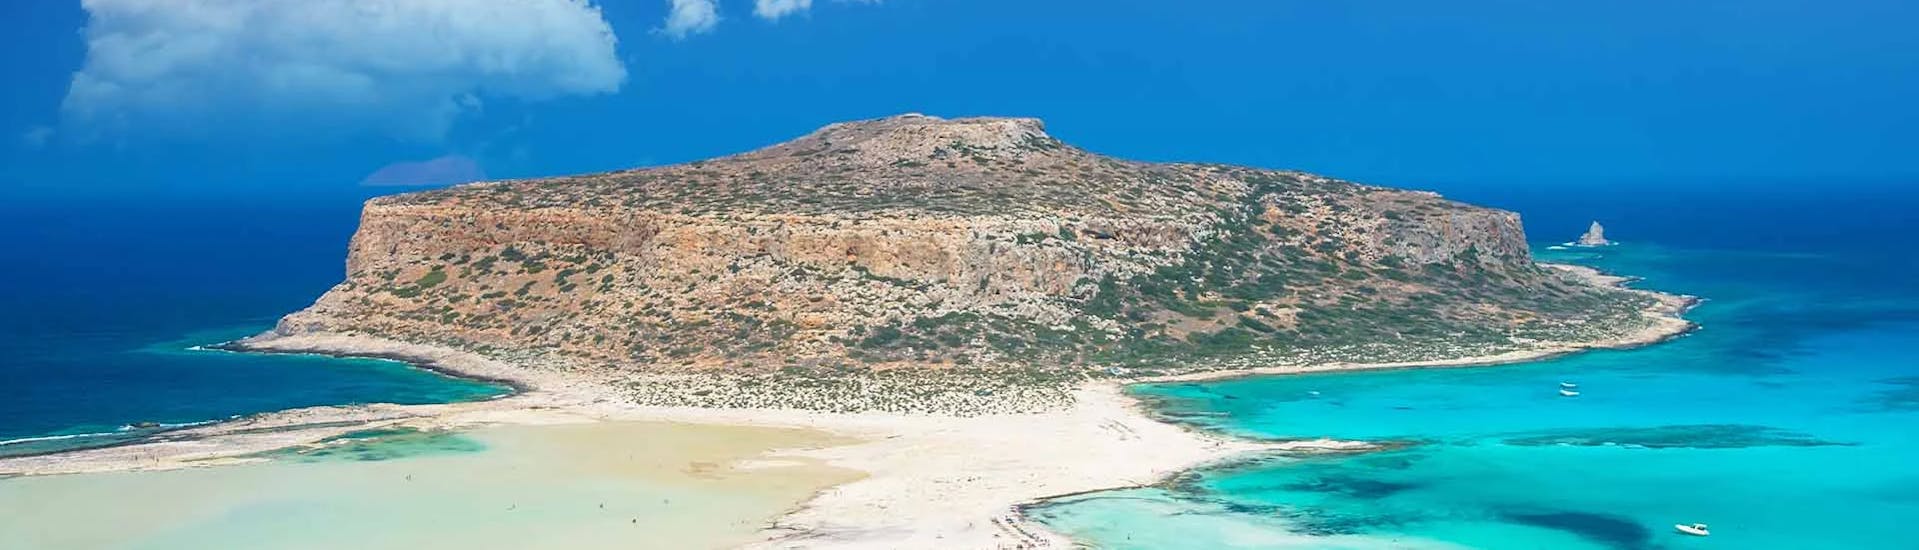 Gramvousa Island that you can visit during the Private Boat Trip from Falasarna to the Balos Lagoon & Gramvousa.